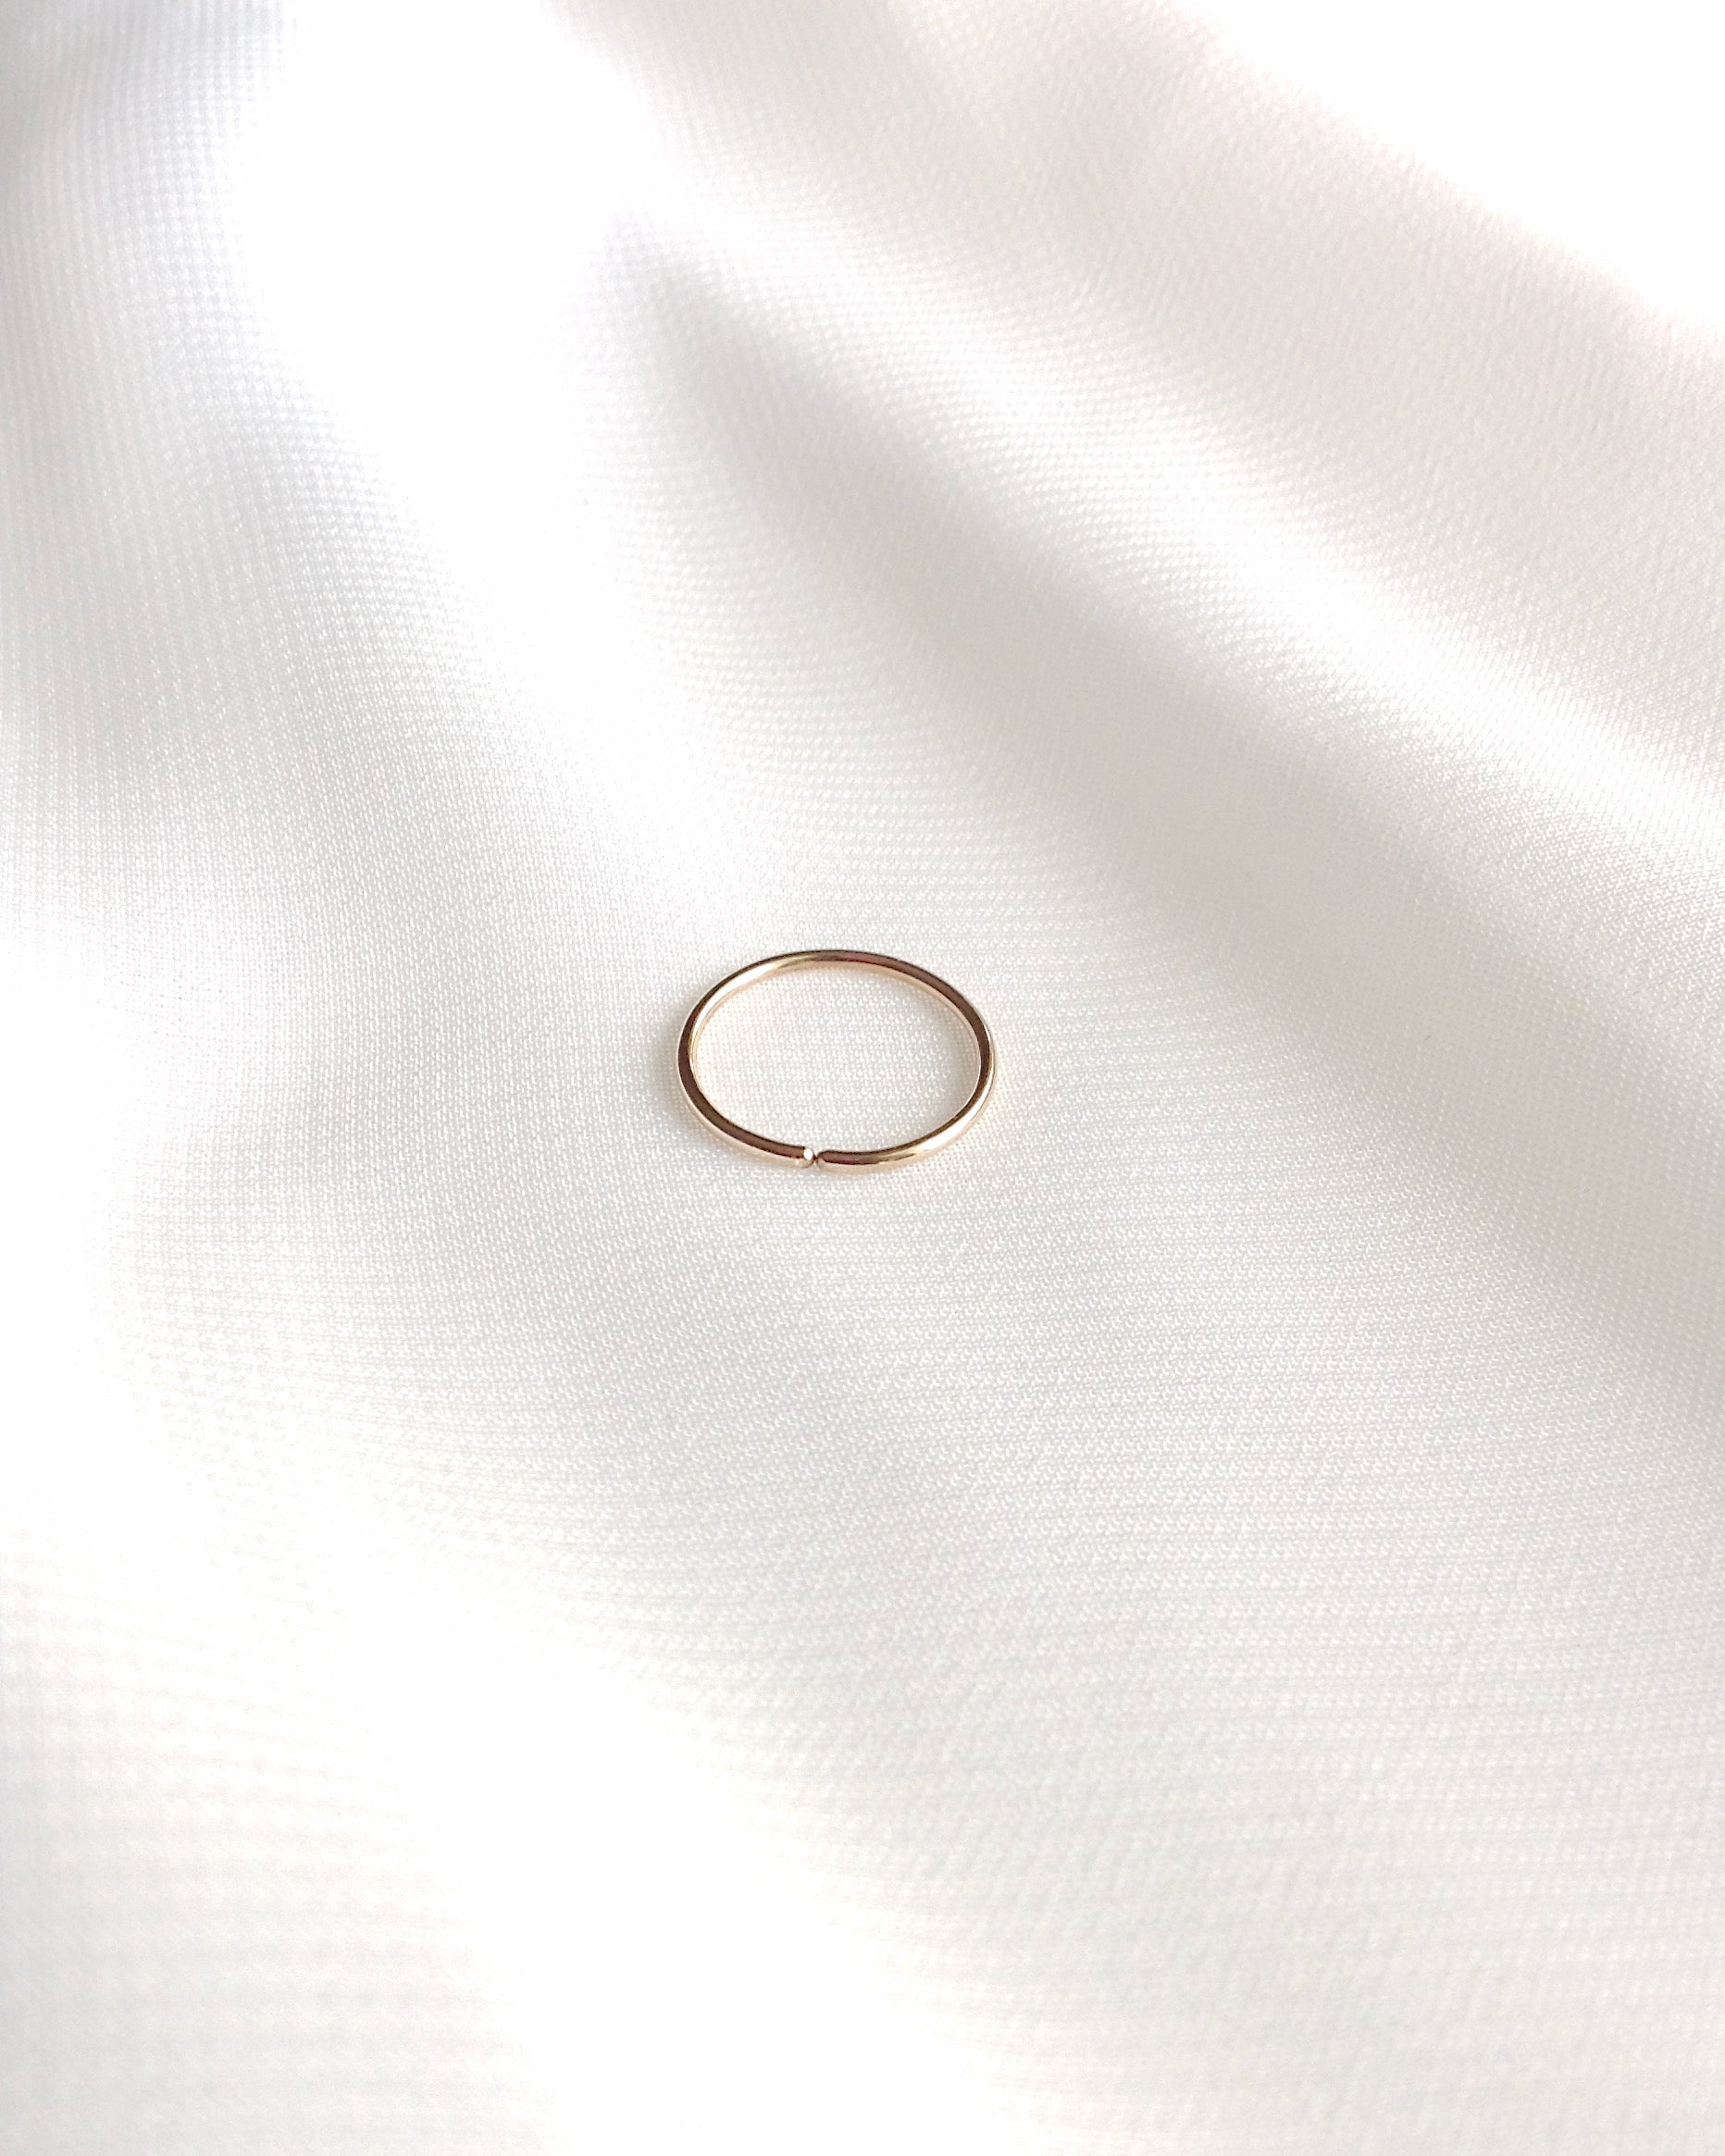 10mm 11mm 12mm 13mm 14mm 15mm Conch Hoop in Gold Filled Sterling Silver or Rose Gold Filled | Large Cartilage Hoop | IB Jewelry